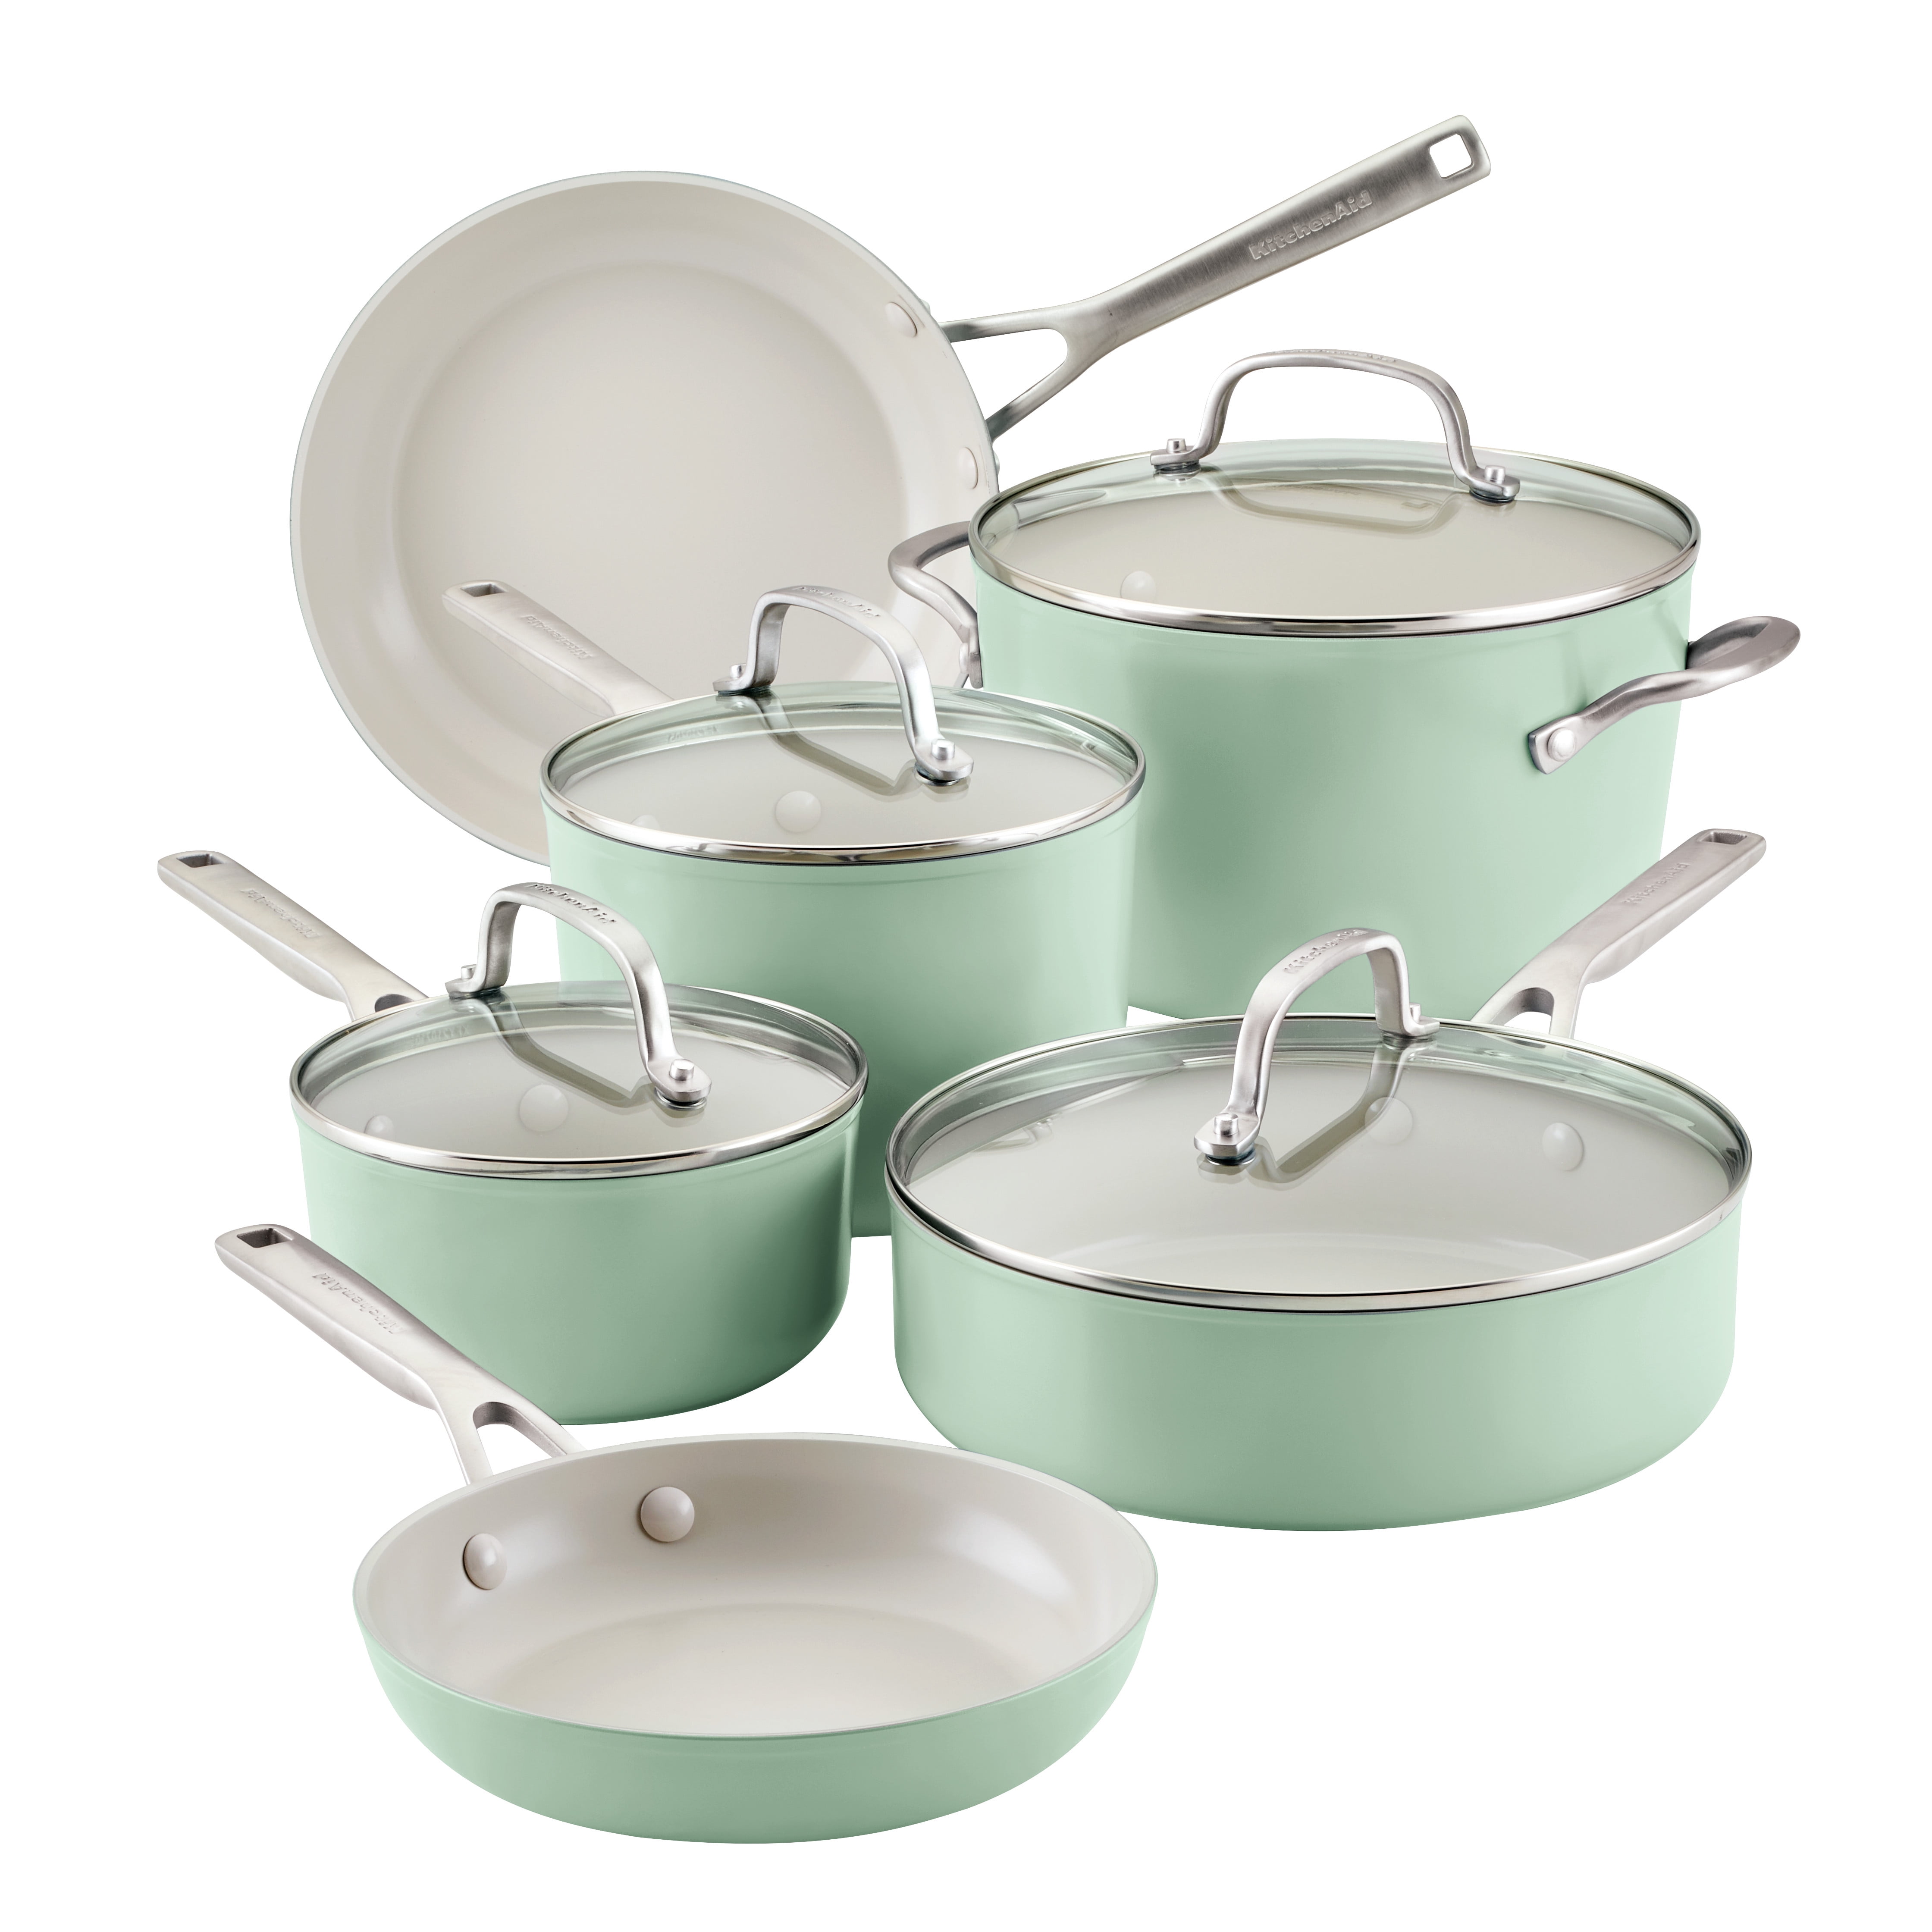 Save $200 on this Carote cookware set at Walmart